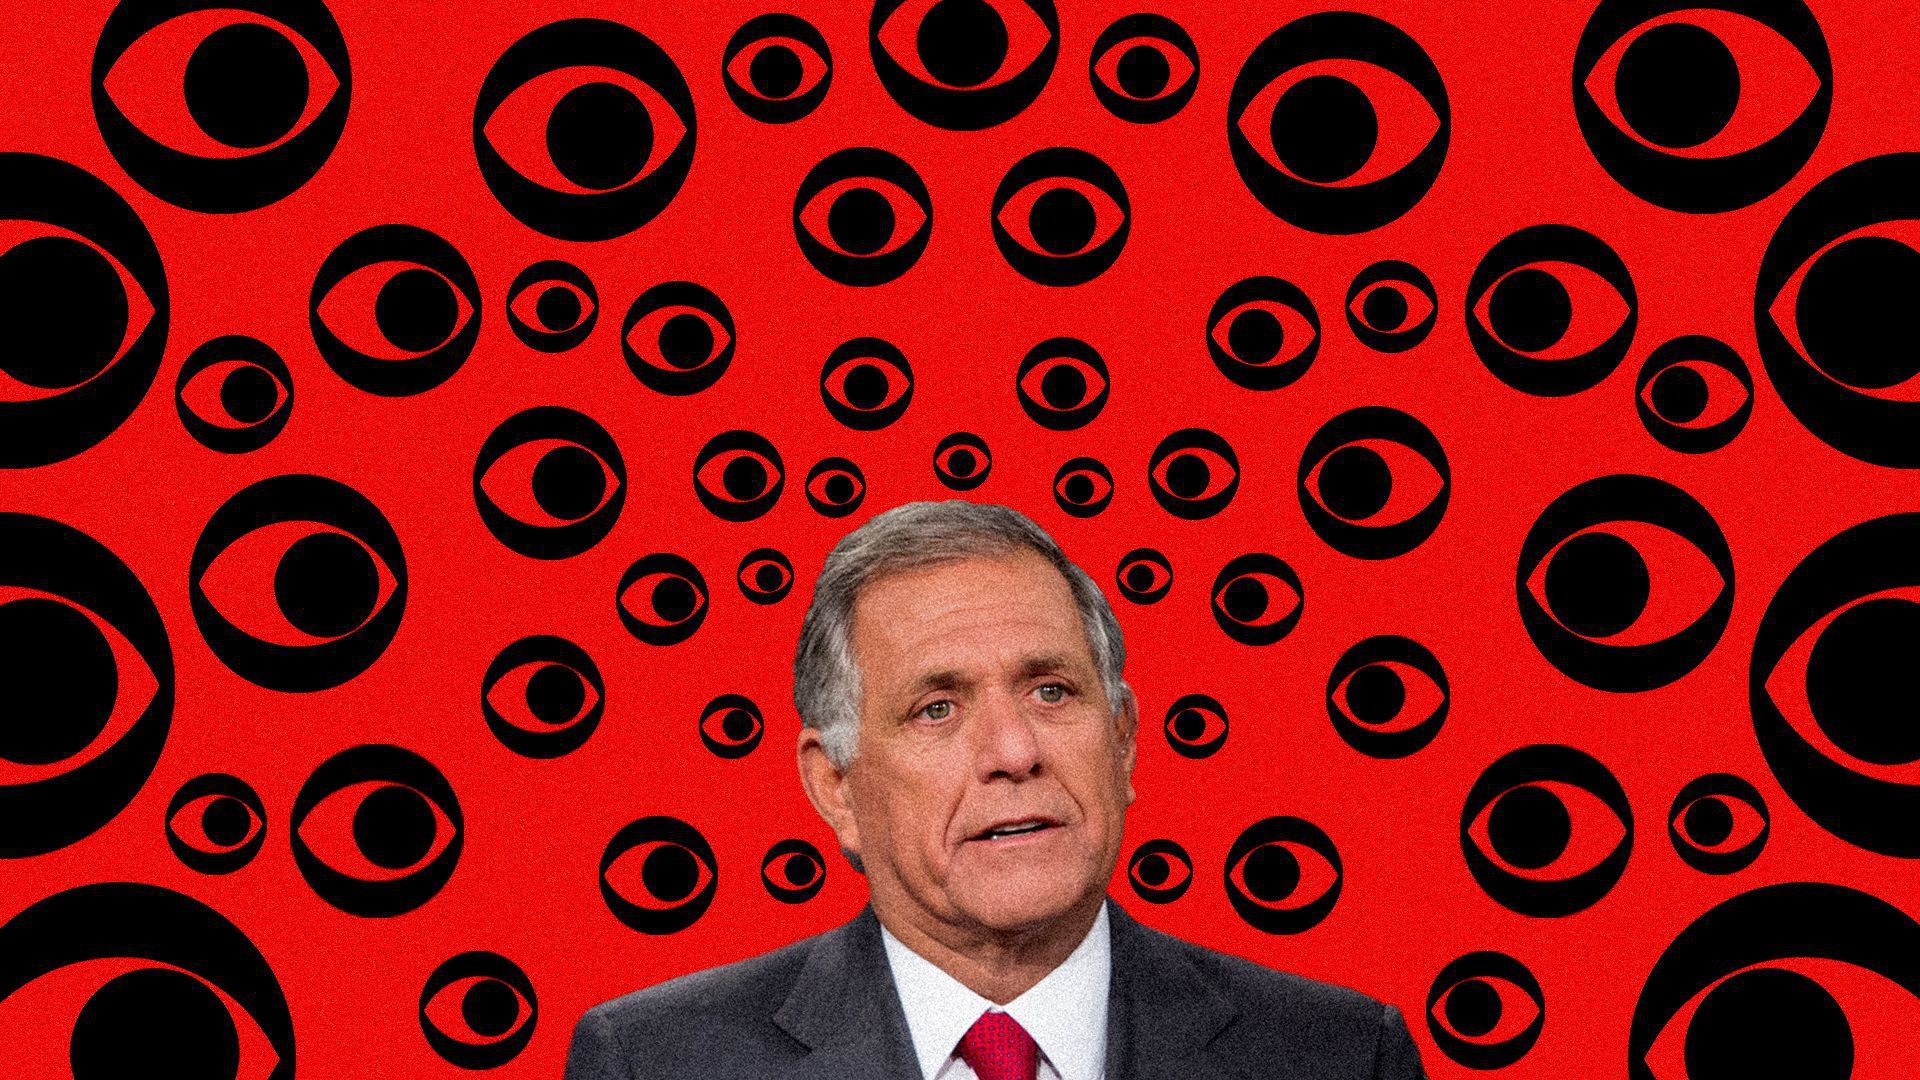 Image of former CBS CEO Les Moonves against a backdrop of CBS logos